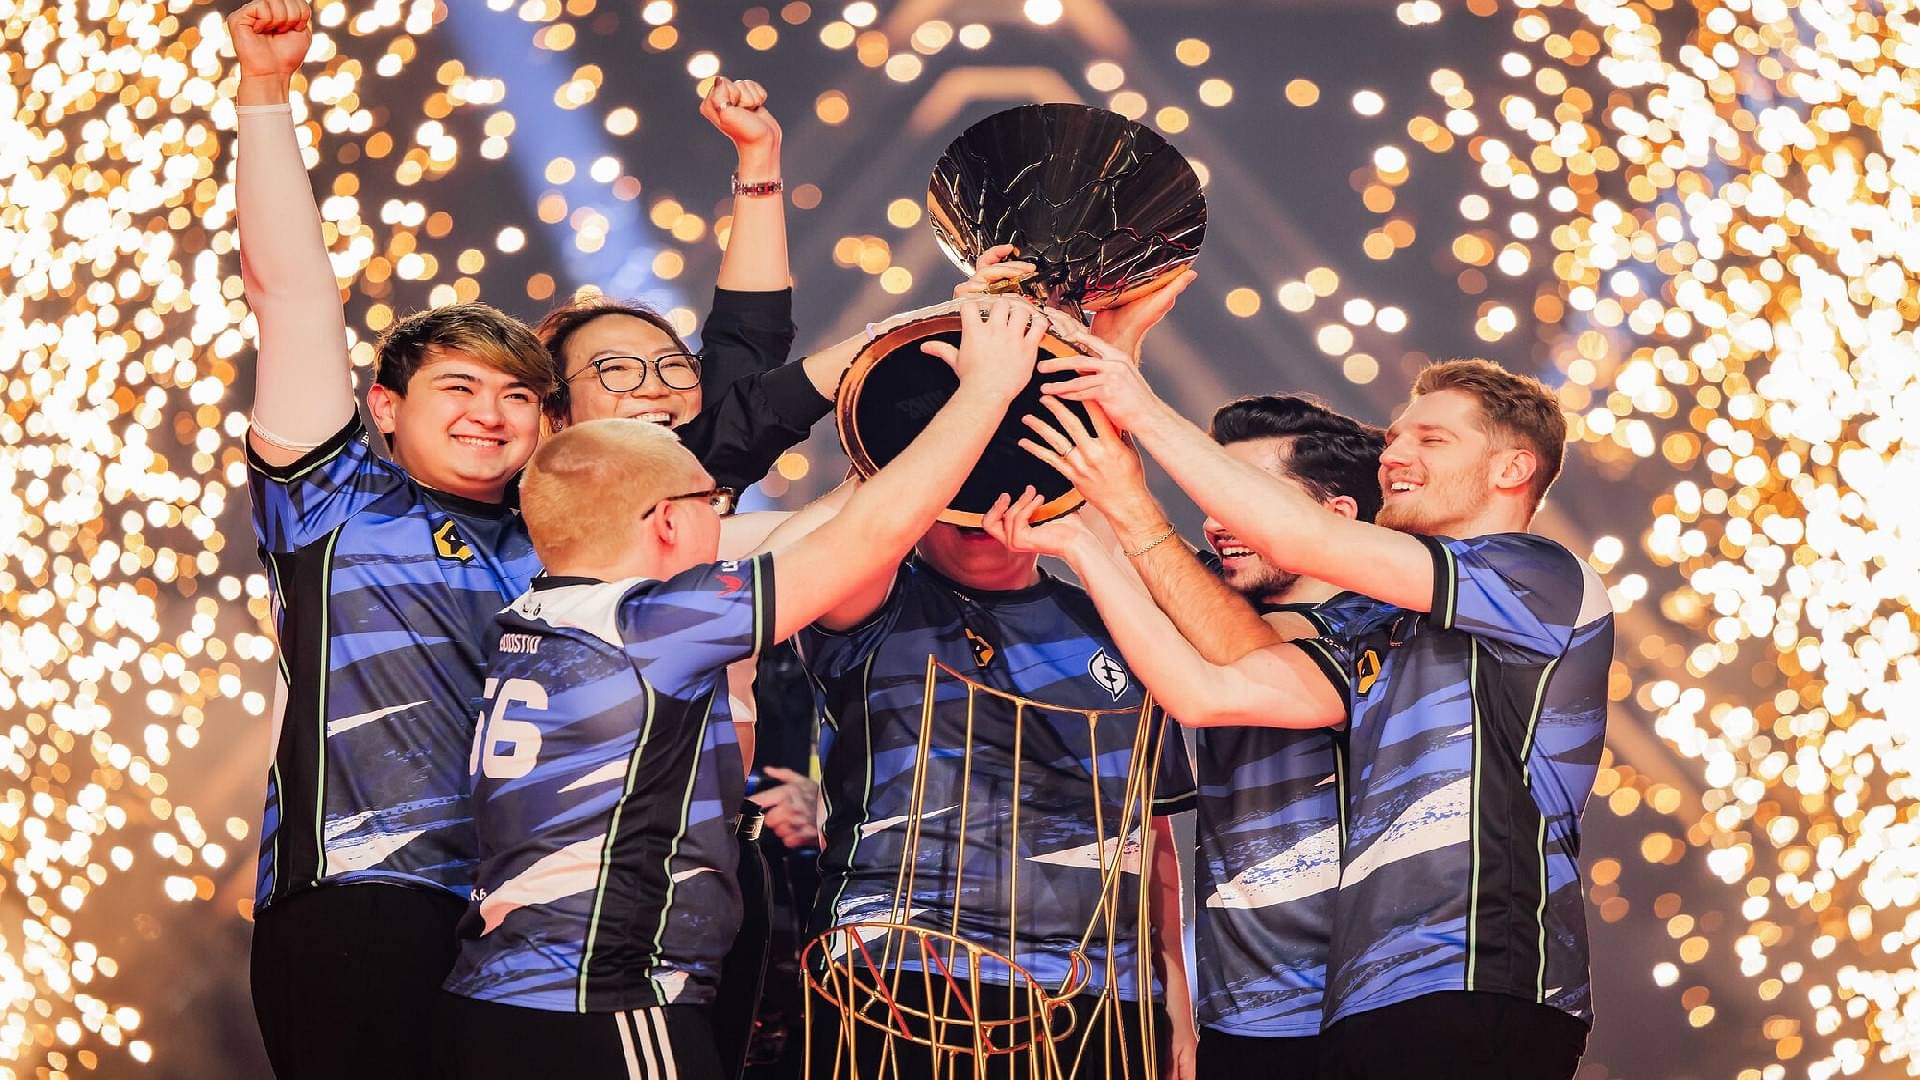 webnexttech | Once Dota 2 The International 5 winners, Evil Geniuses Leave All Esports Except Valorant